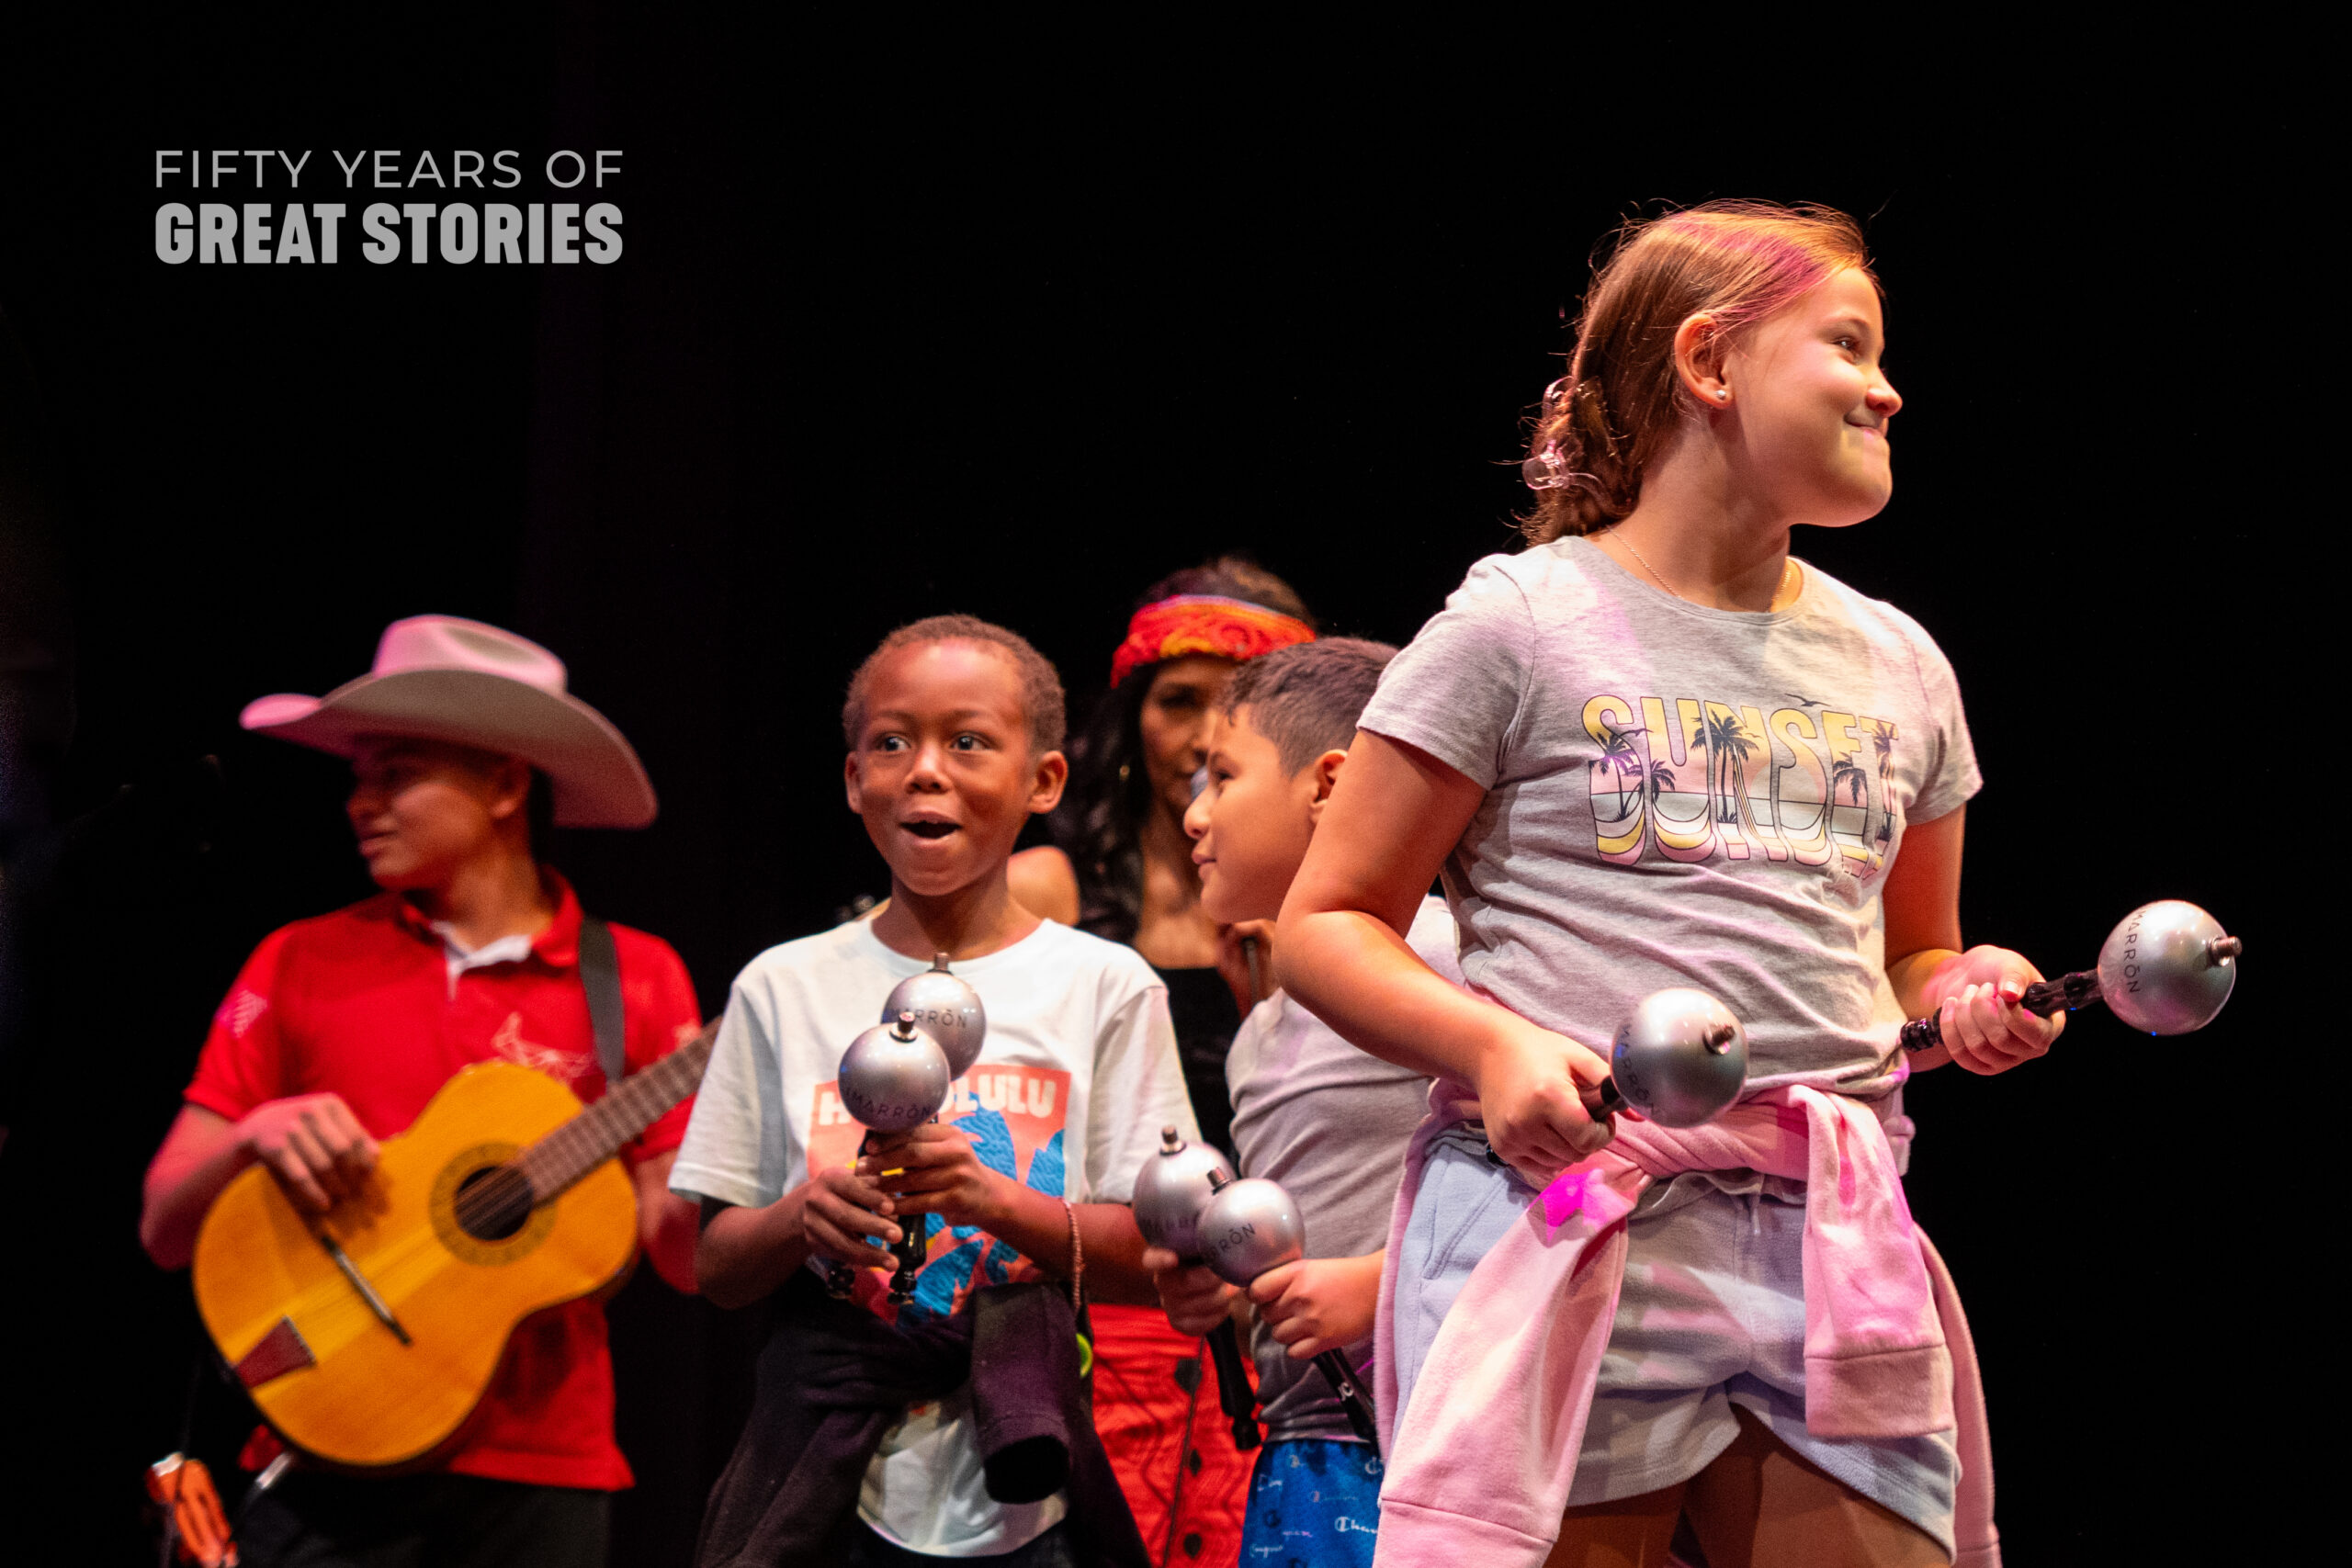 A group of children stand on stage holding maracas. They have excited expressions on their faces.